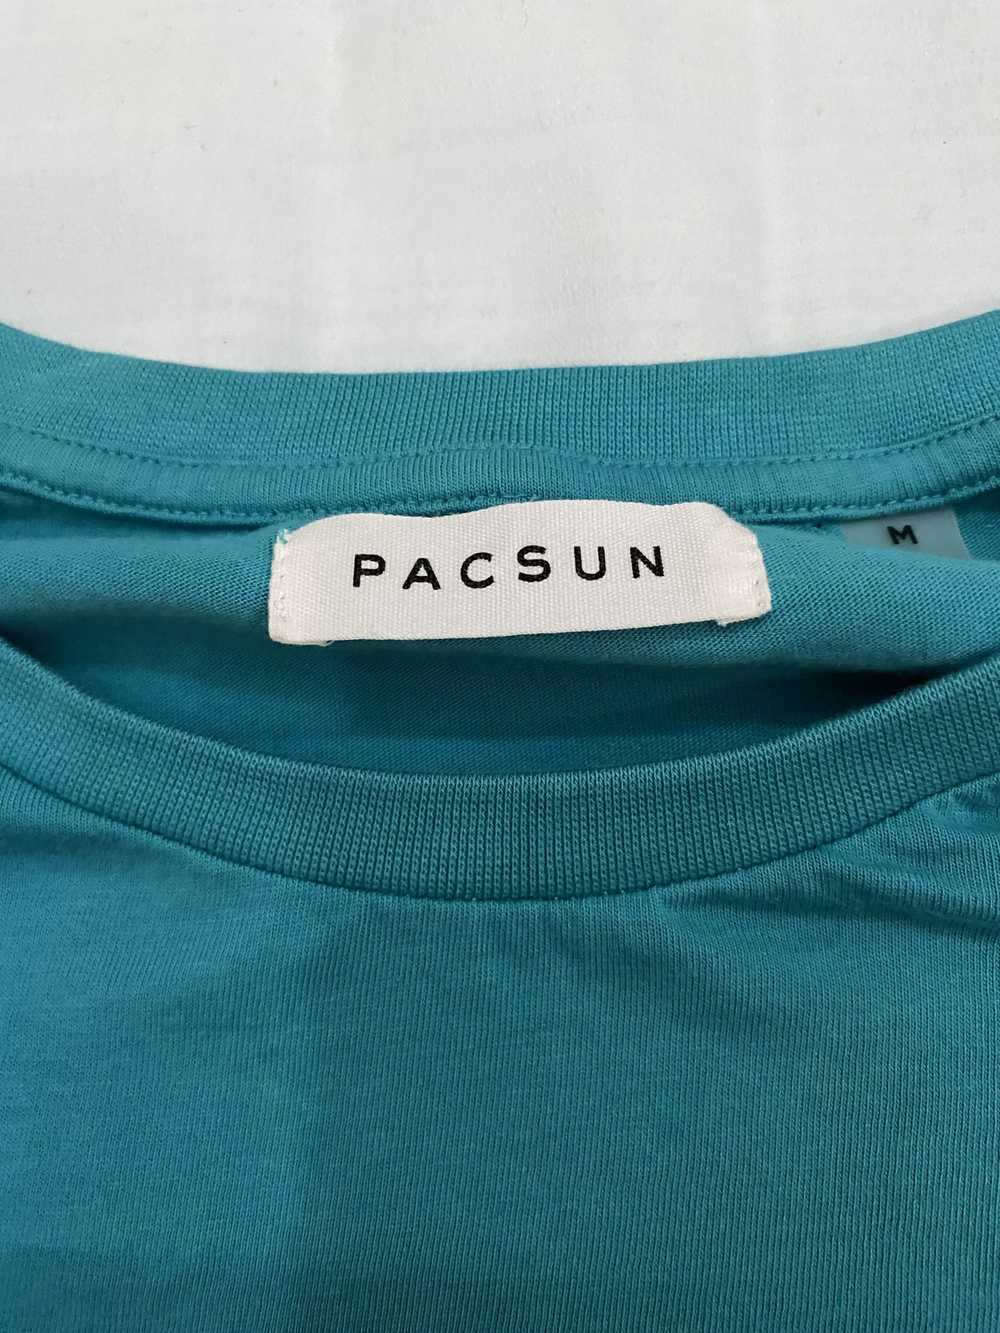 Pacsun Rocky Mountains Long Sleeve T-Shirt - image 5